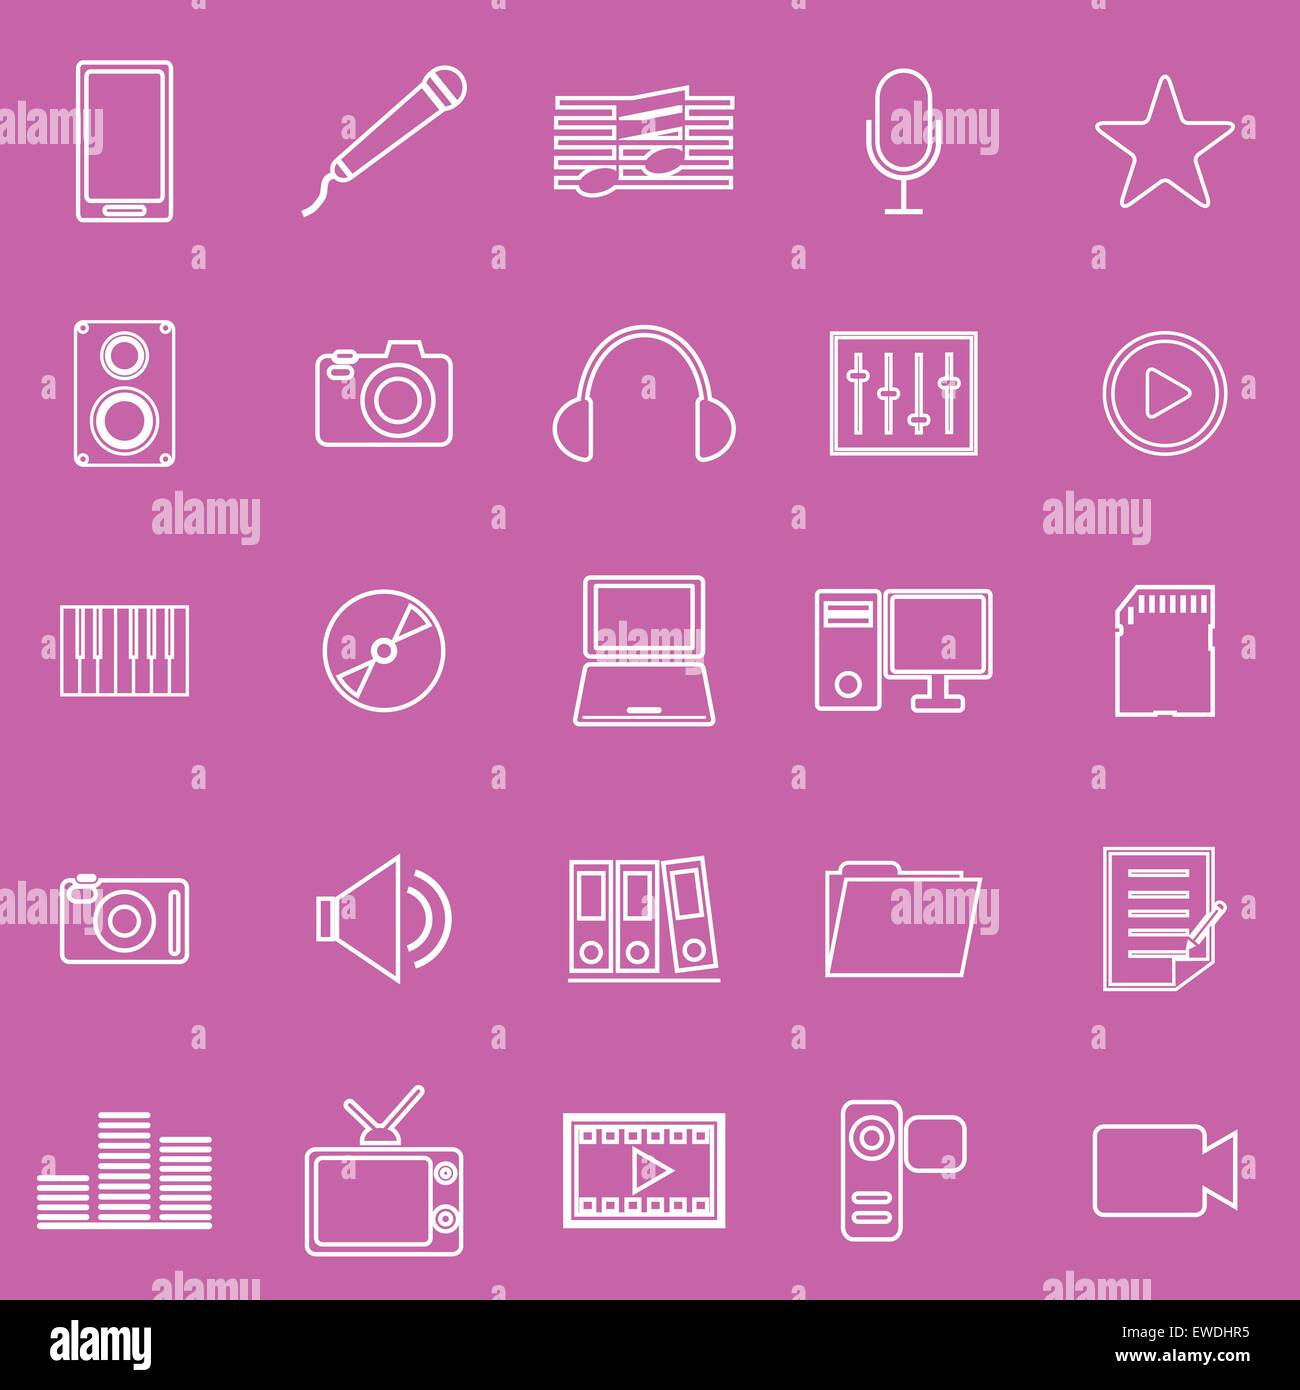 Media line icons on pink background, stock vector Stock Vector